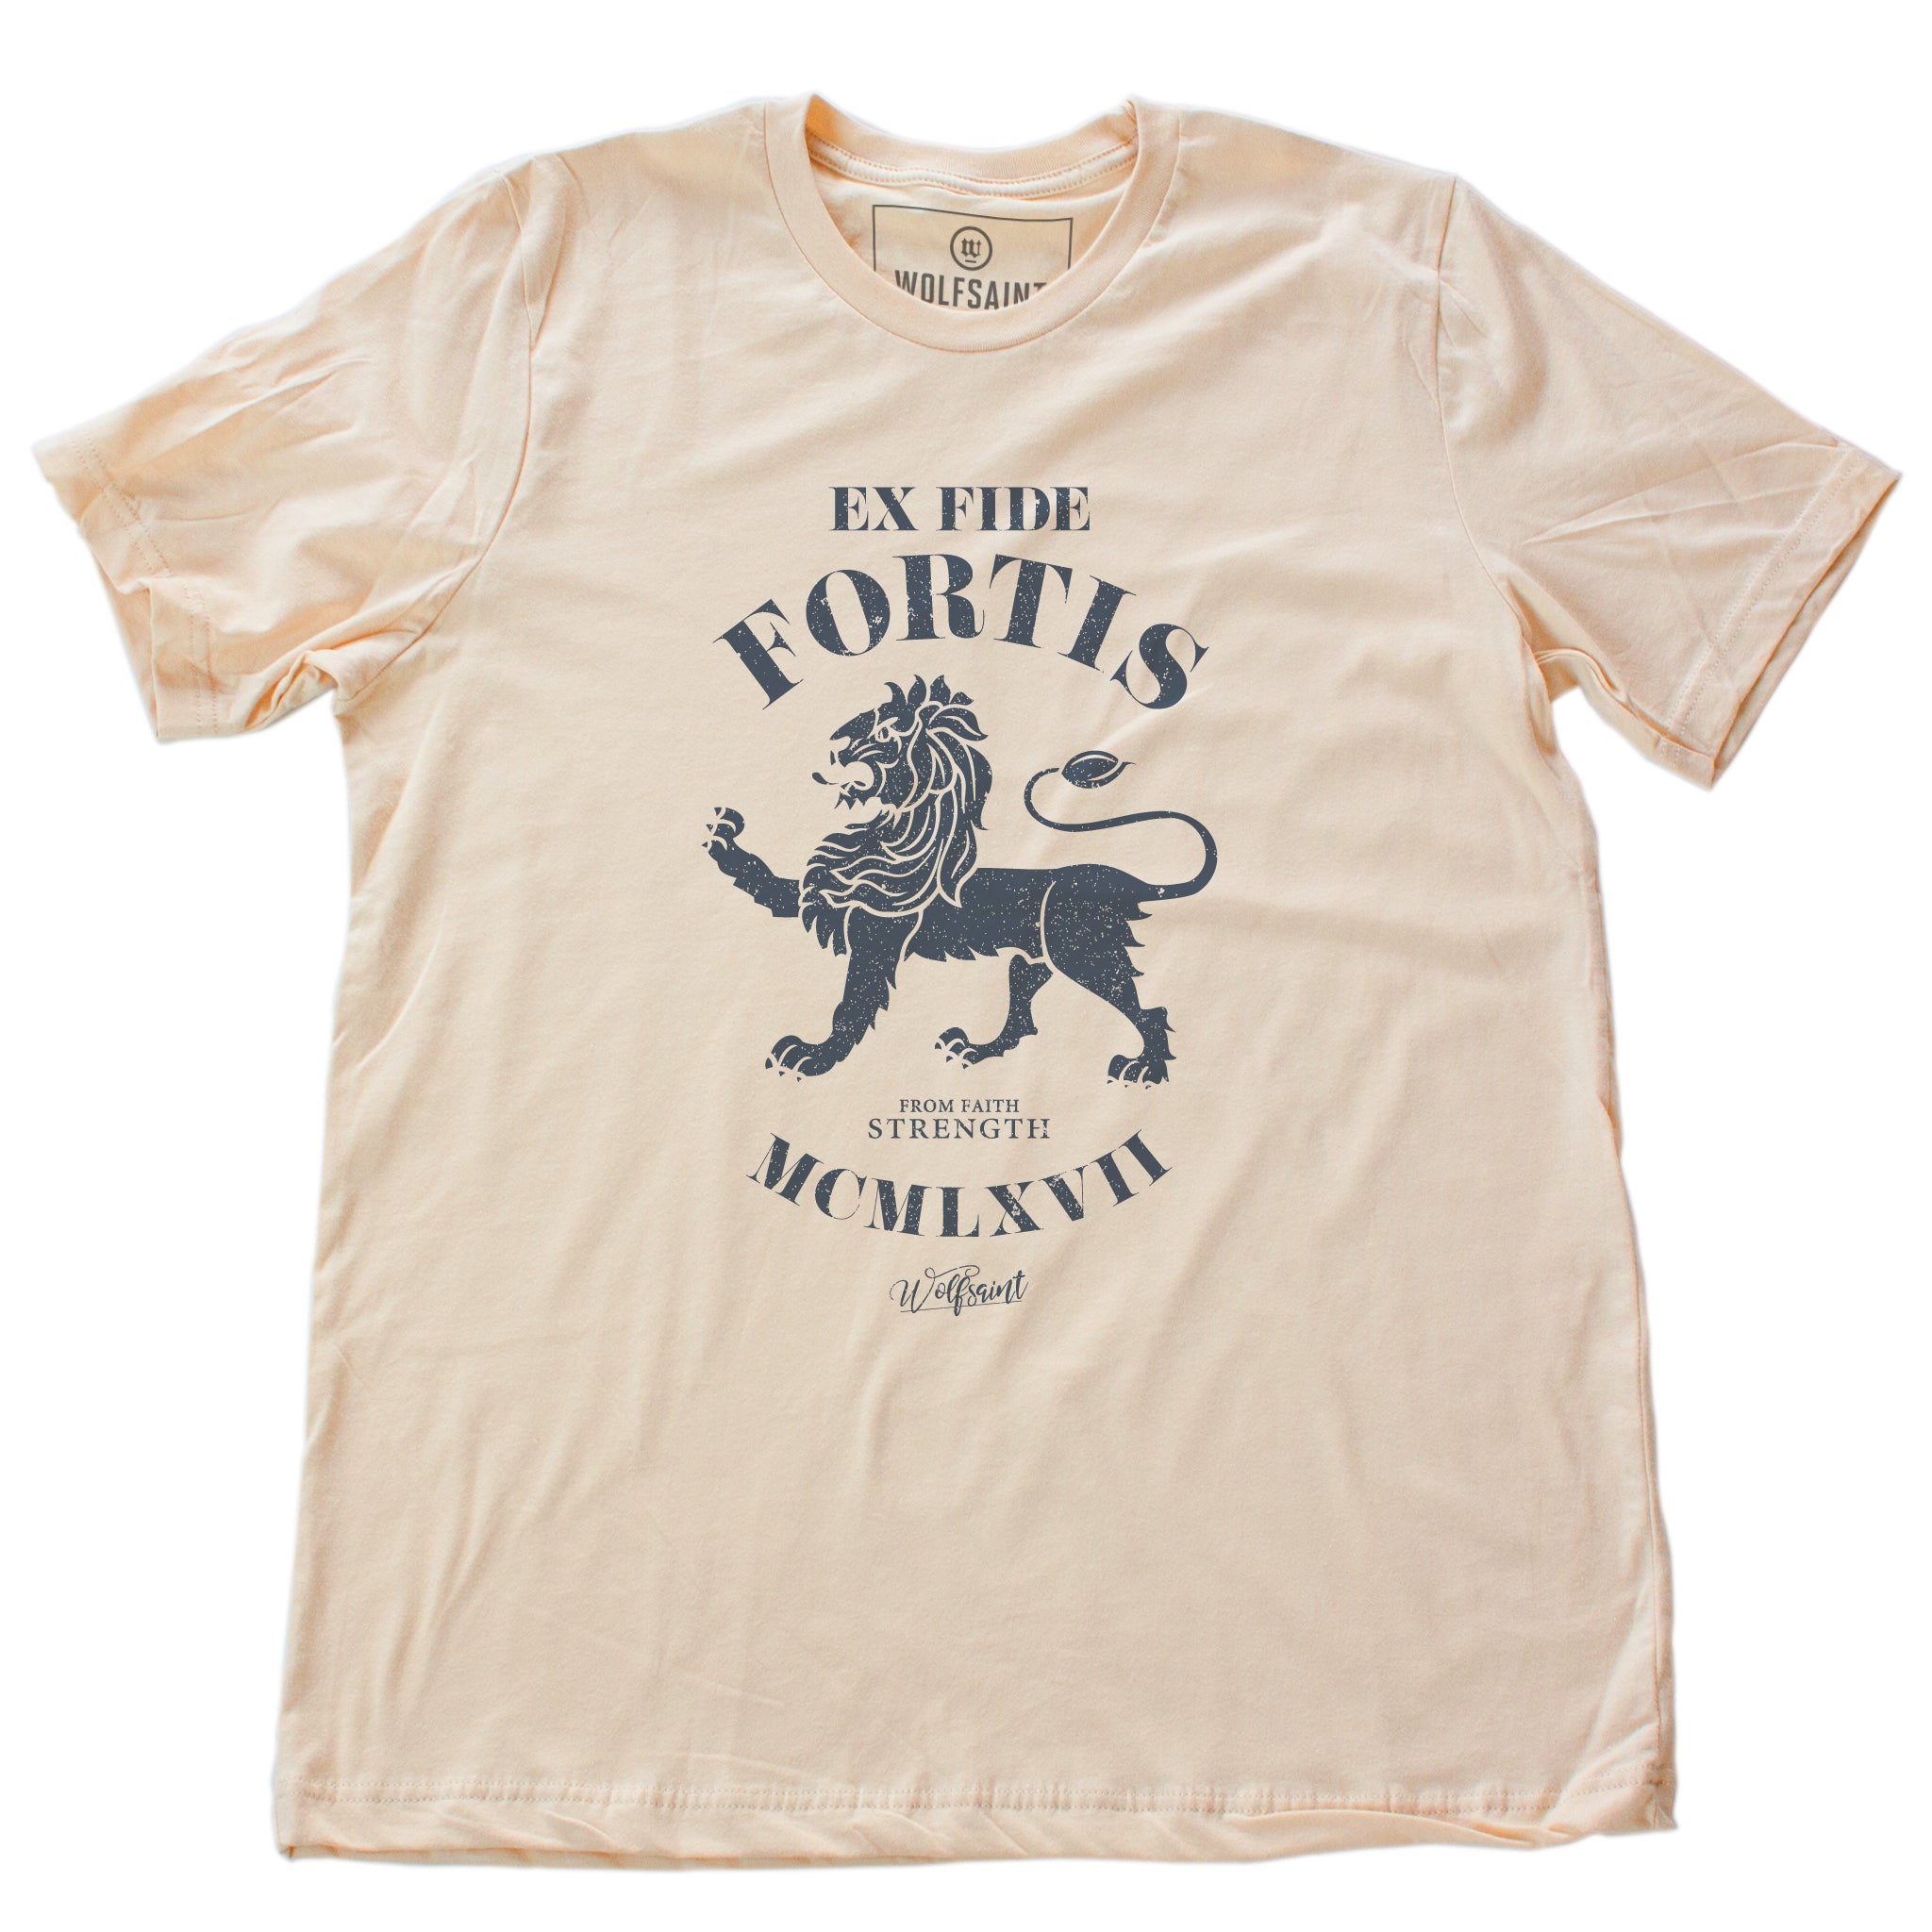 A vintage-inspired classic Soft Cream retro t-shirt featuring a strong graphic of a lion, with the Latin phrase meaning “Out of faith, strength.” By wolfsaint.net